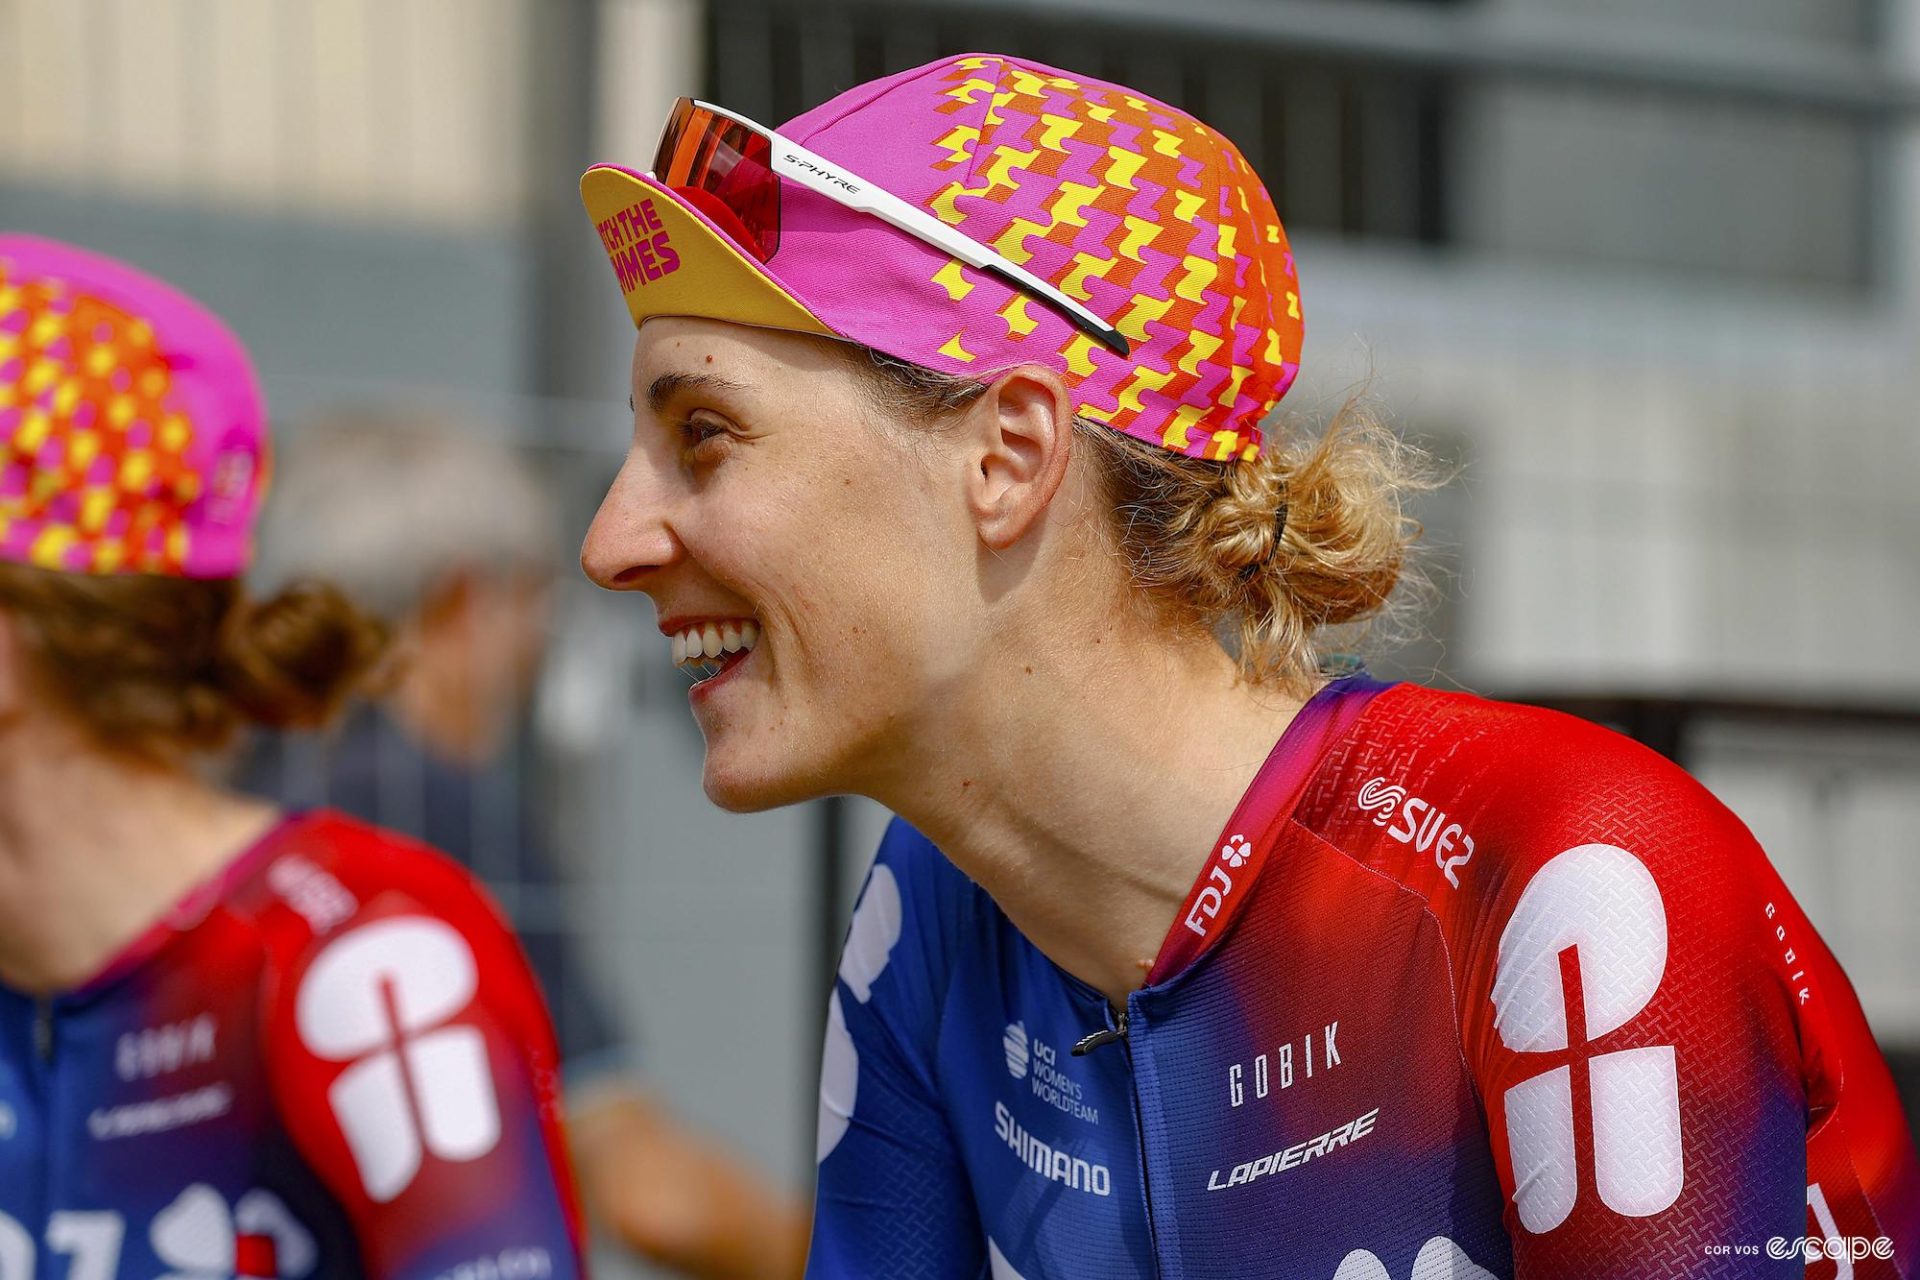 Vittoria Guazzini pictured before the first stage of the 2023 Tour de France Femmes avec Zwift